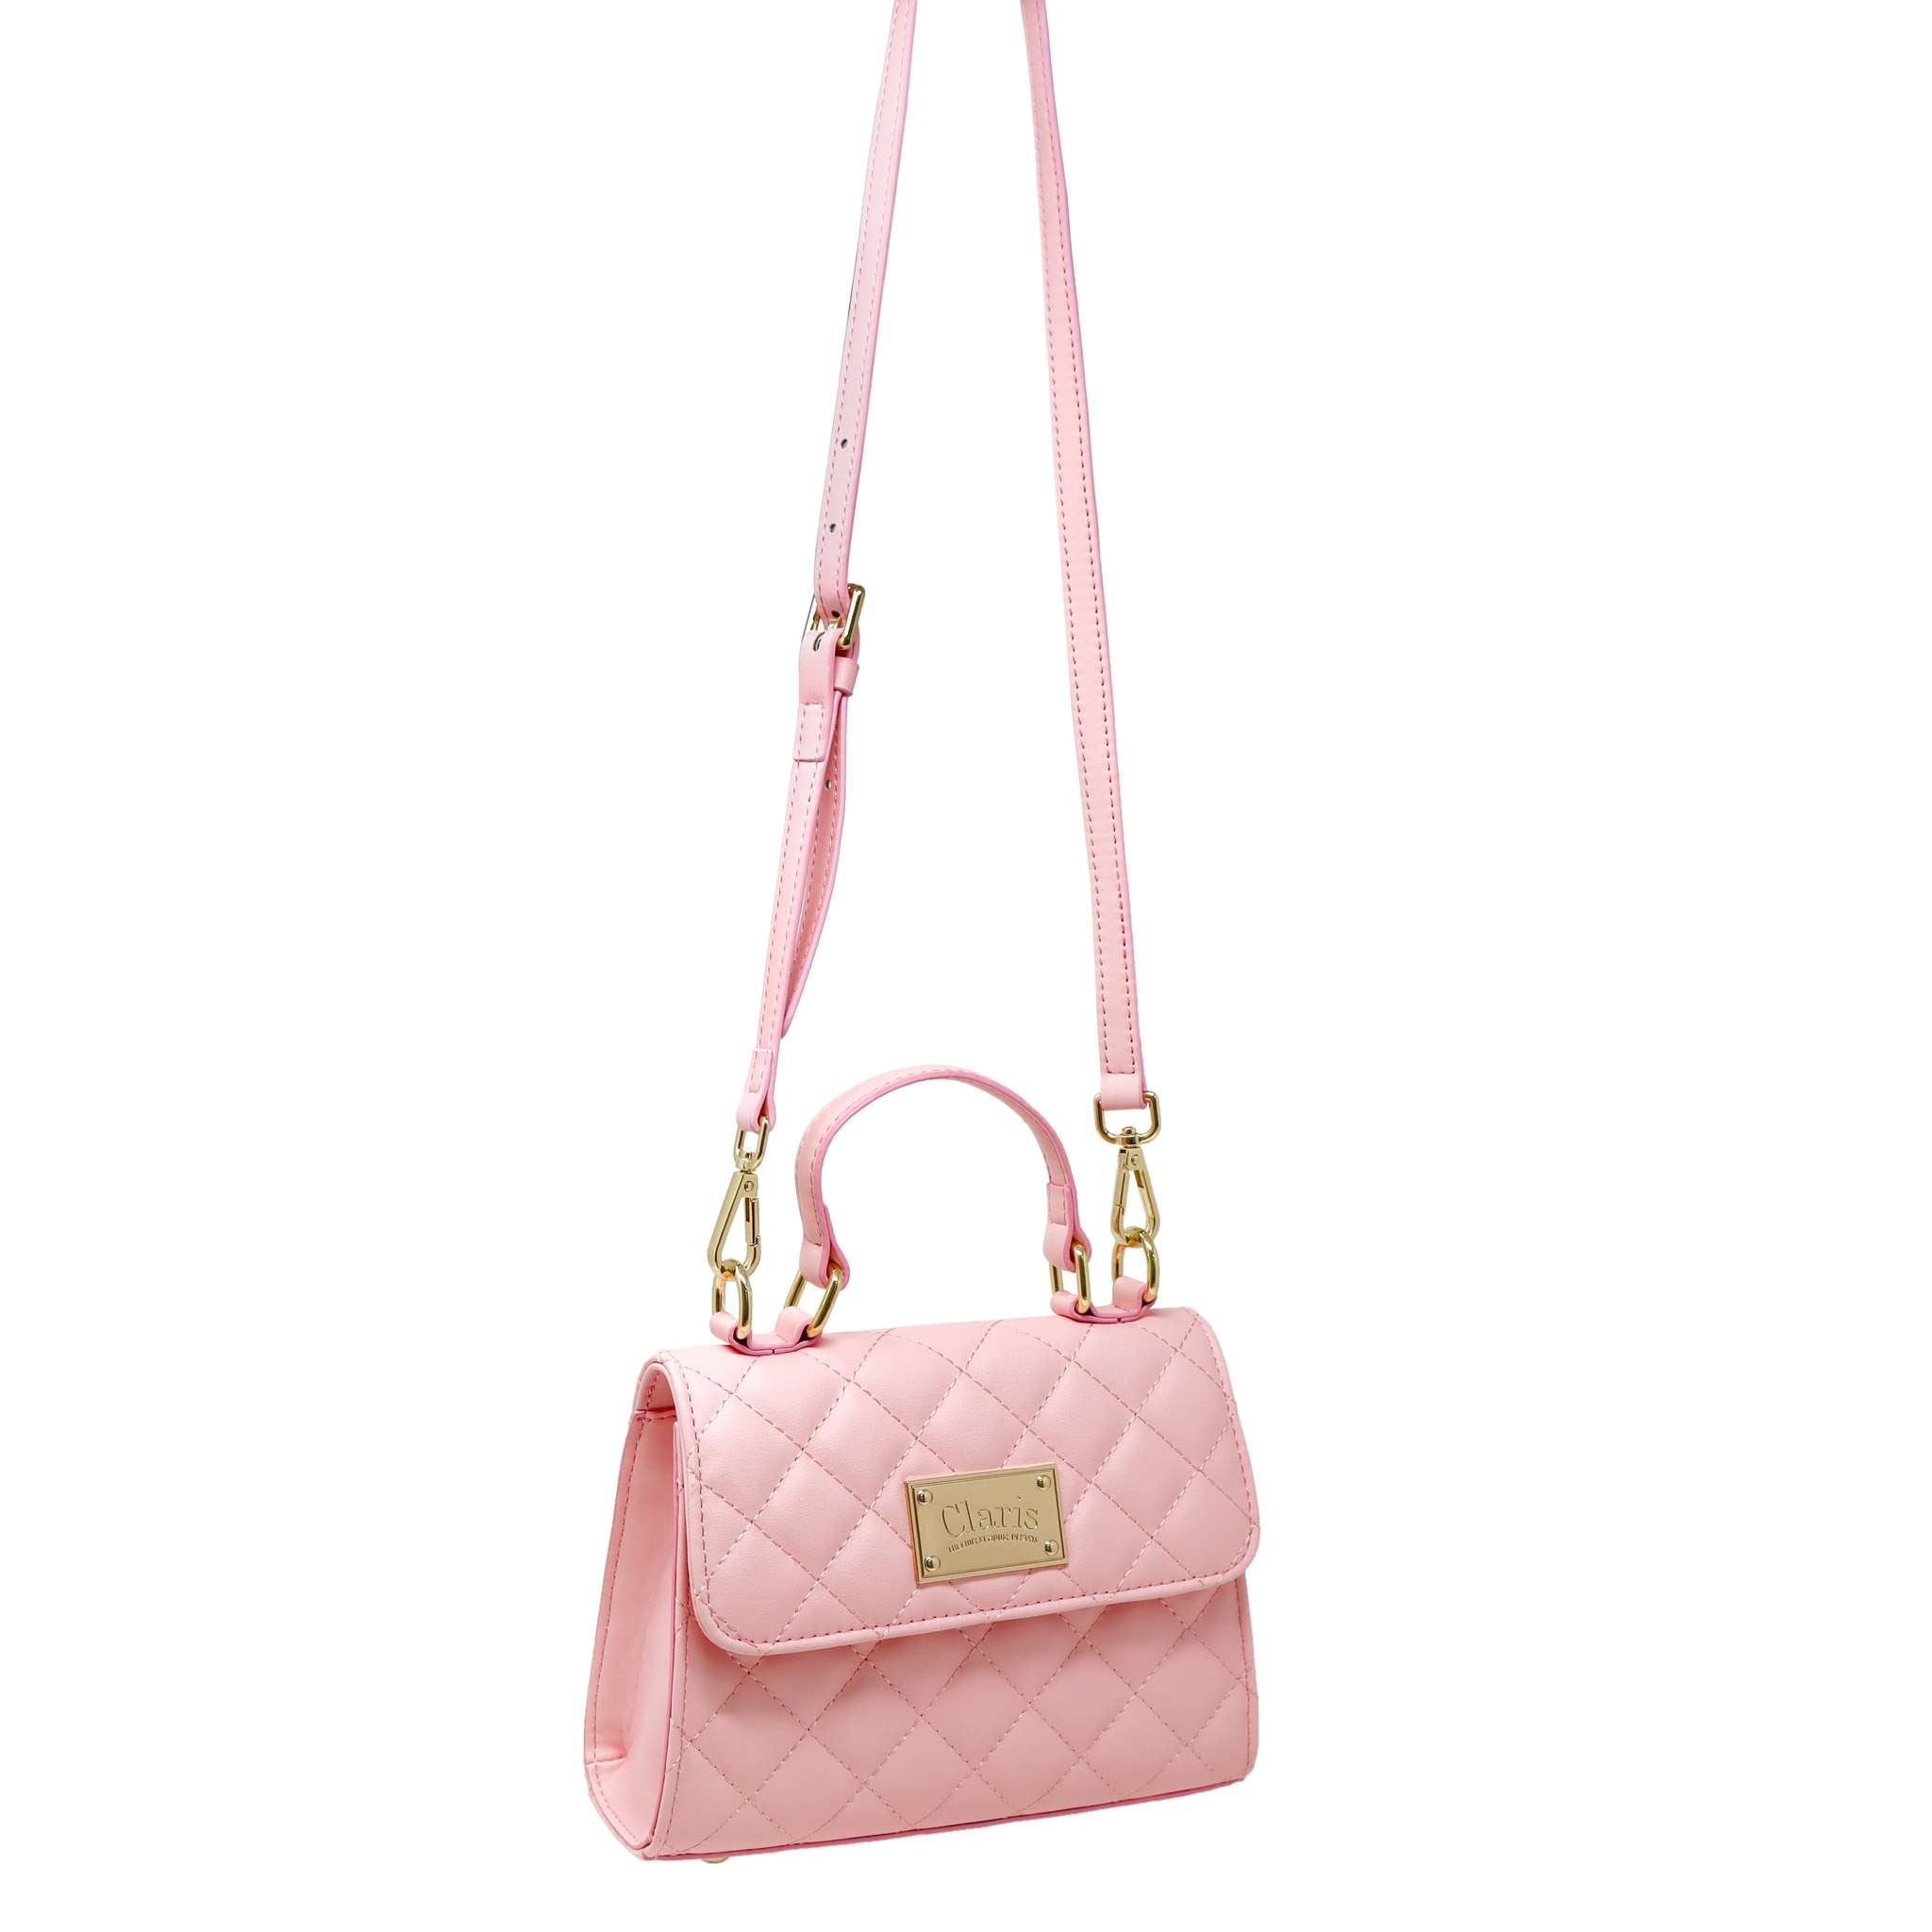 Giggles_couture - PEDRO Quilted MICRO bag - - Pink.